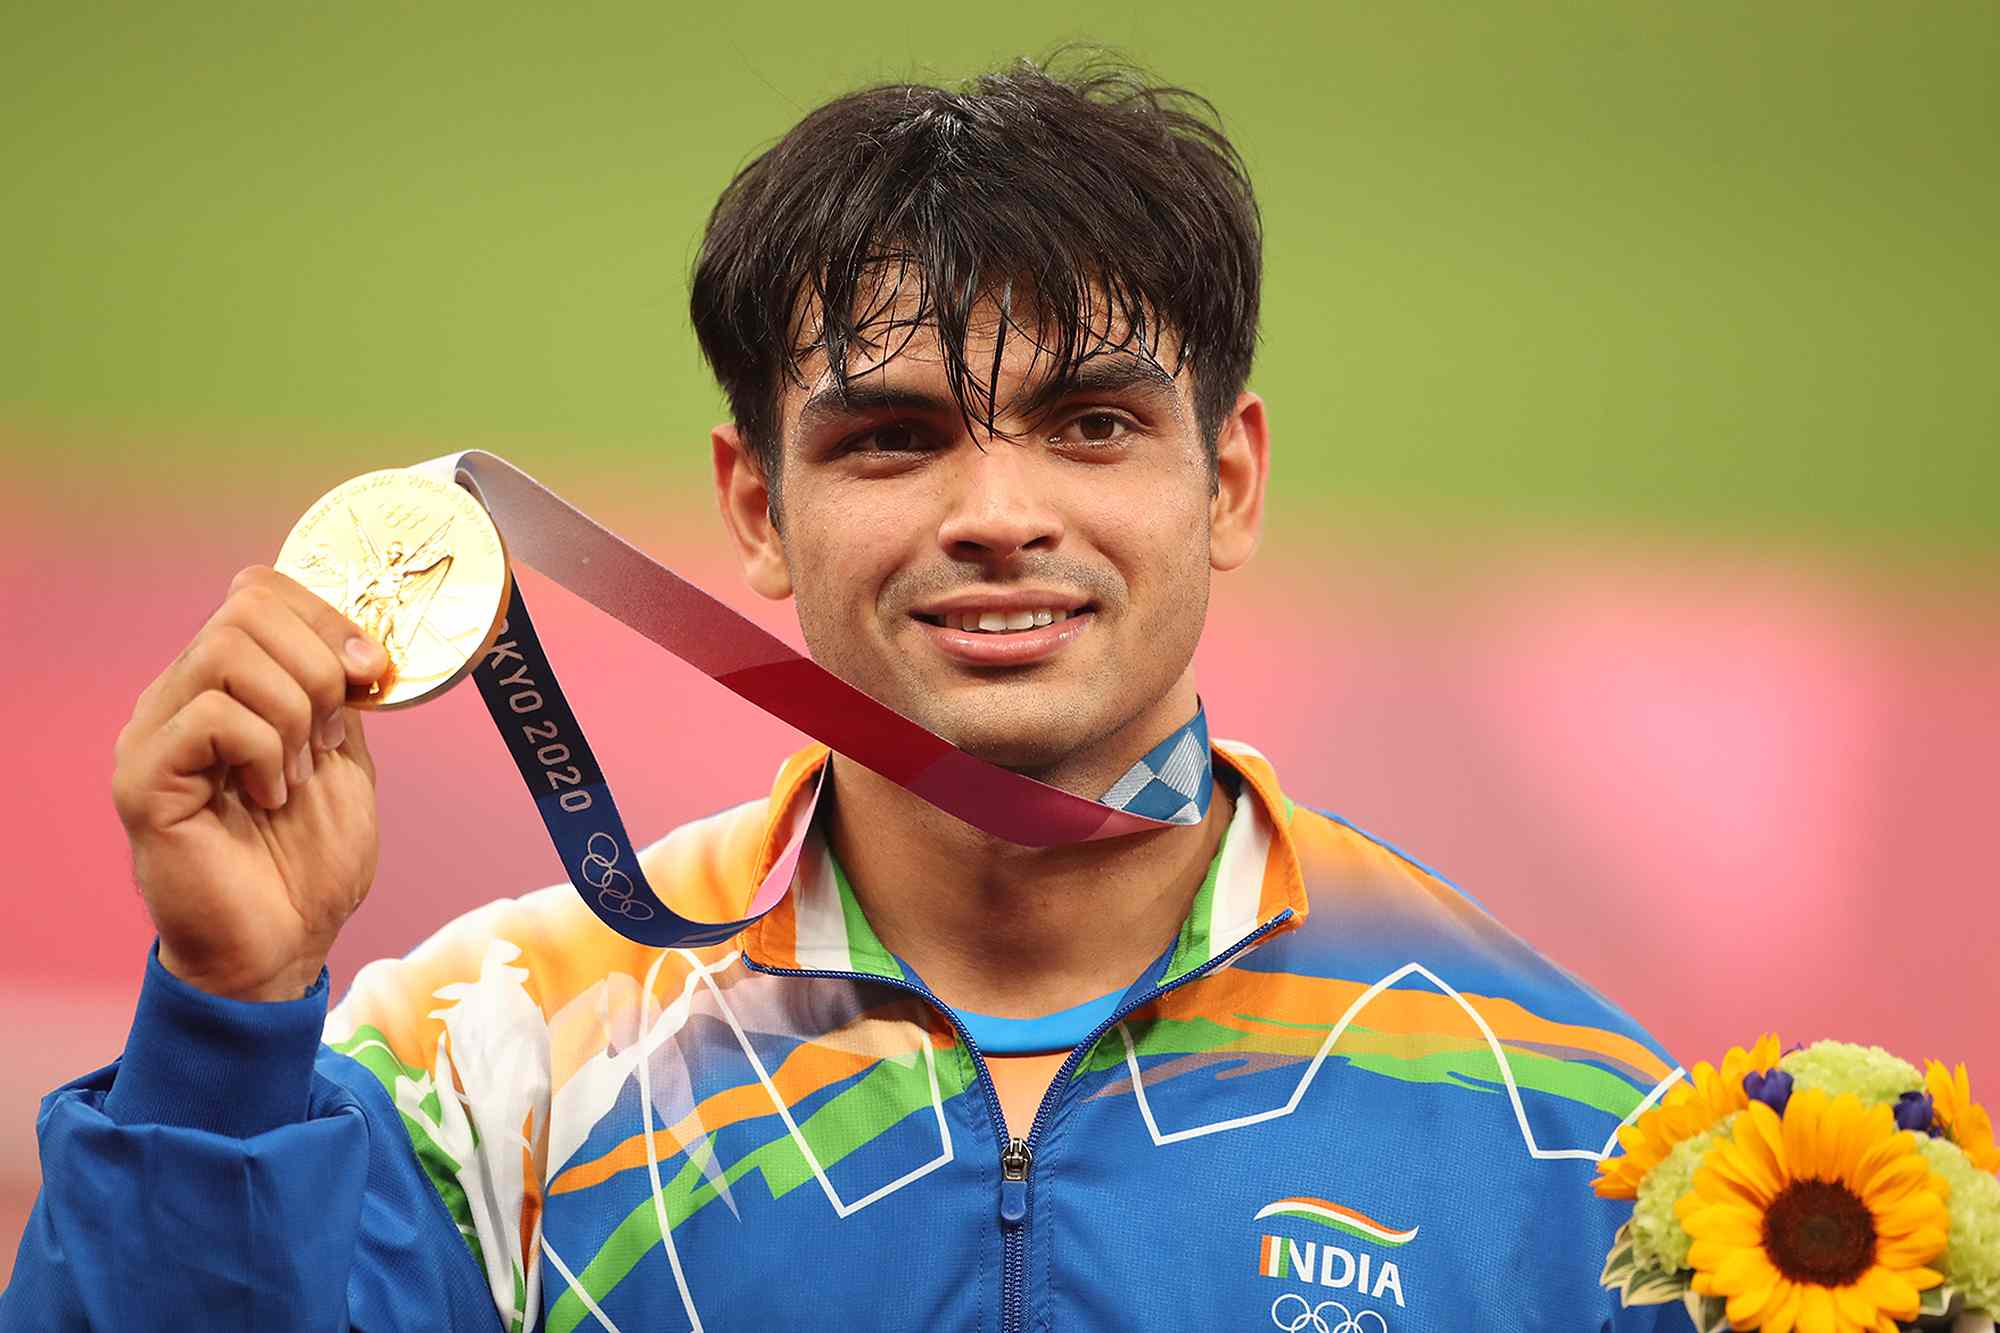 Neeraj Chopra of India on the podium at the medal presentation ceremony after winning the gold medal in the Javelin for men competition during the Track and Field competition at the Olympic Stadium at the Tokyo 2020 Summer Olympic Games on August 7th, 2021 in Tokyo, Japan. 